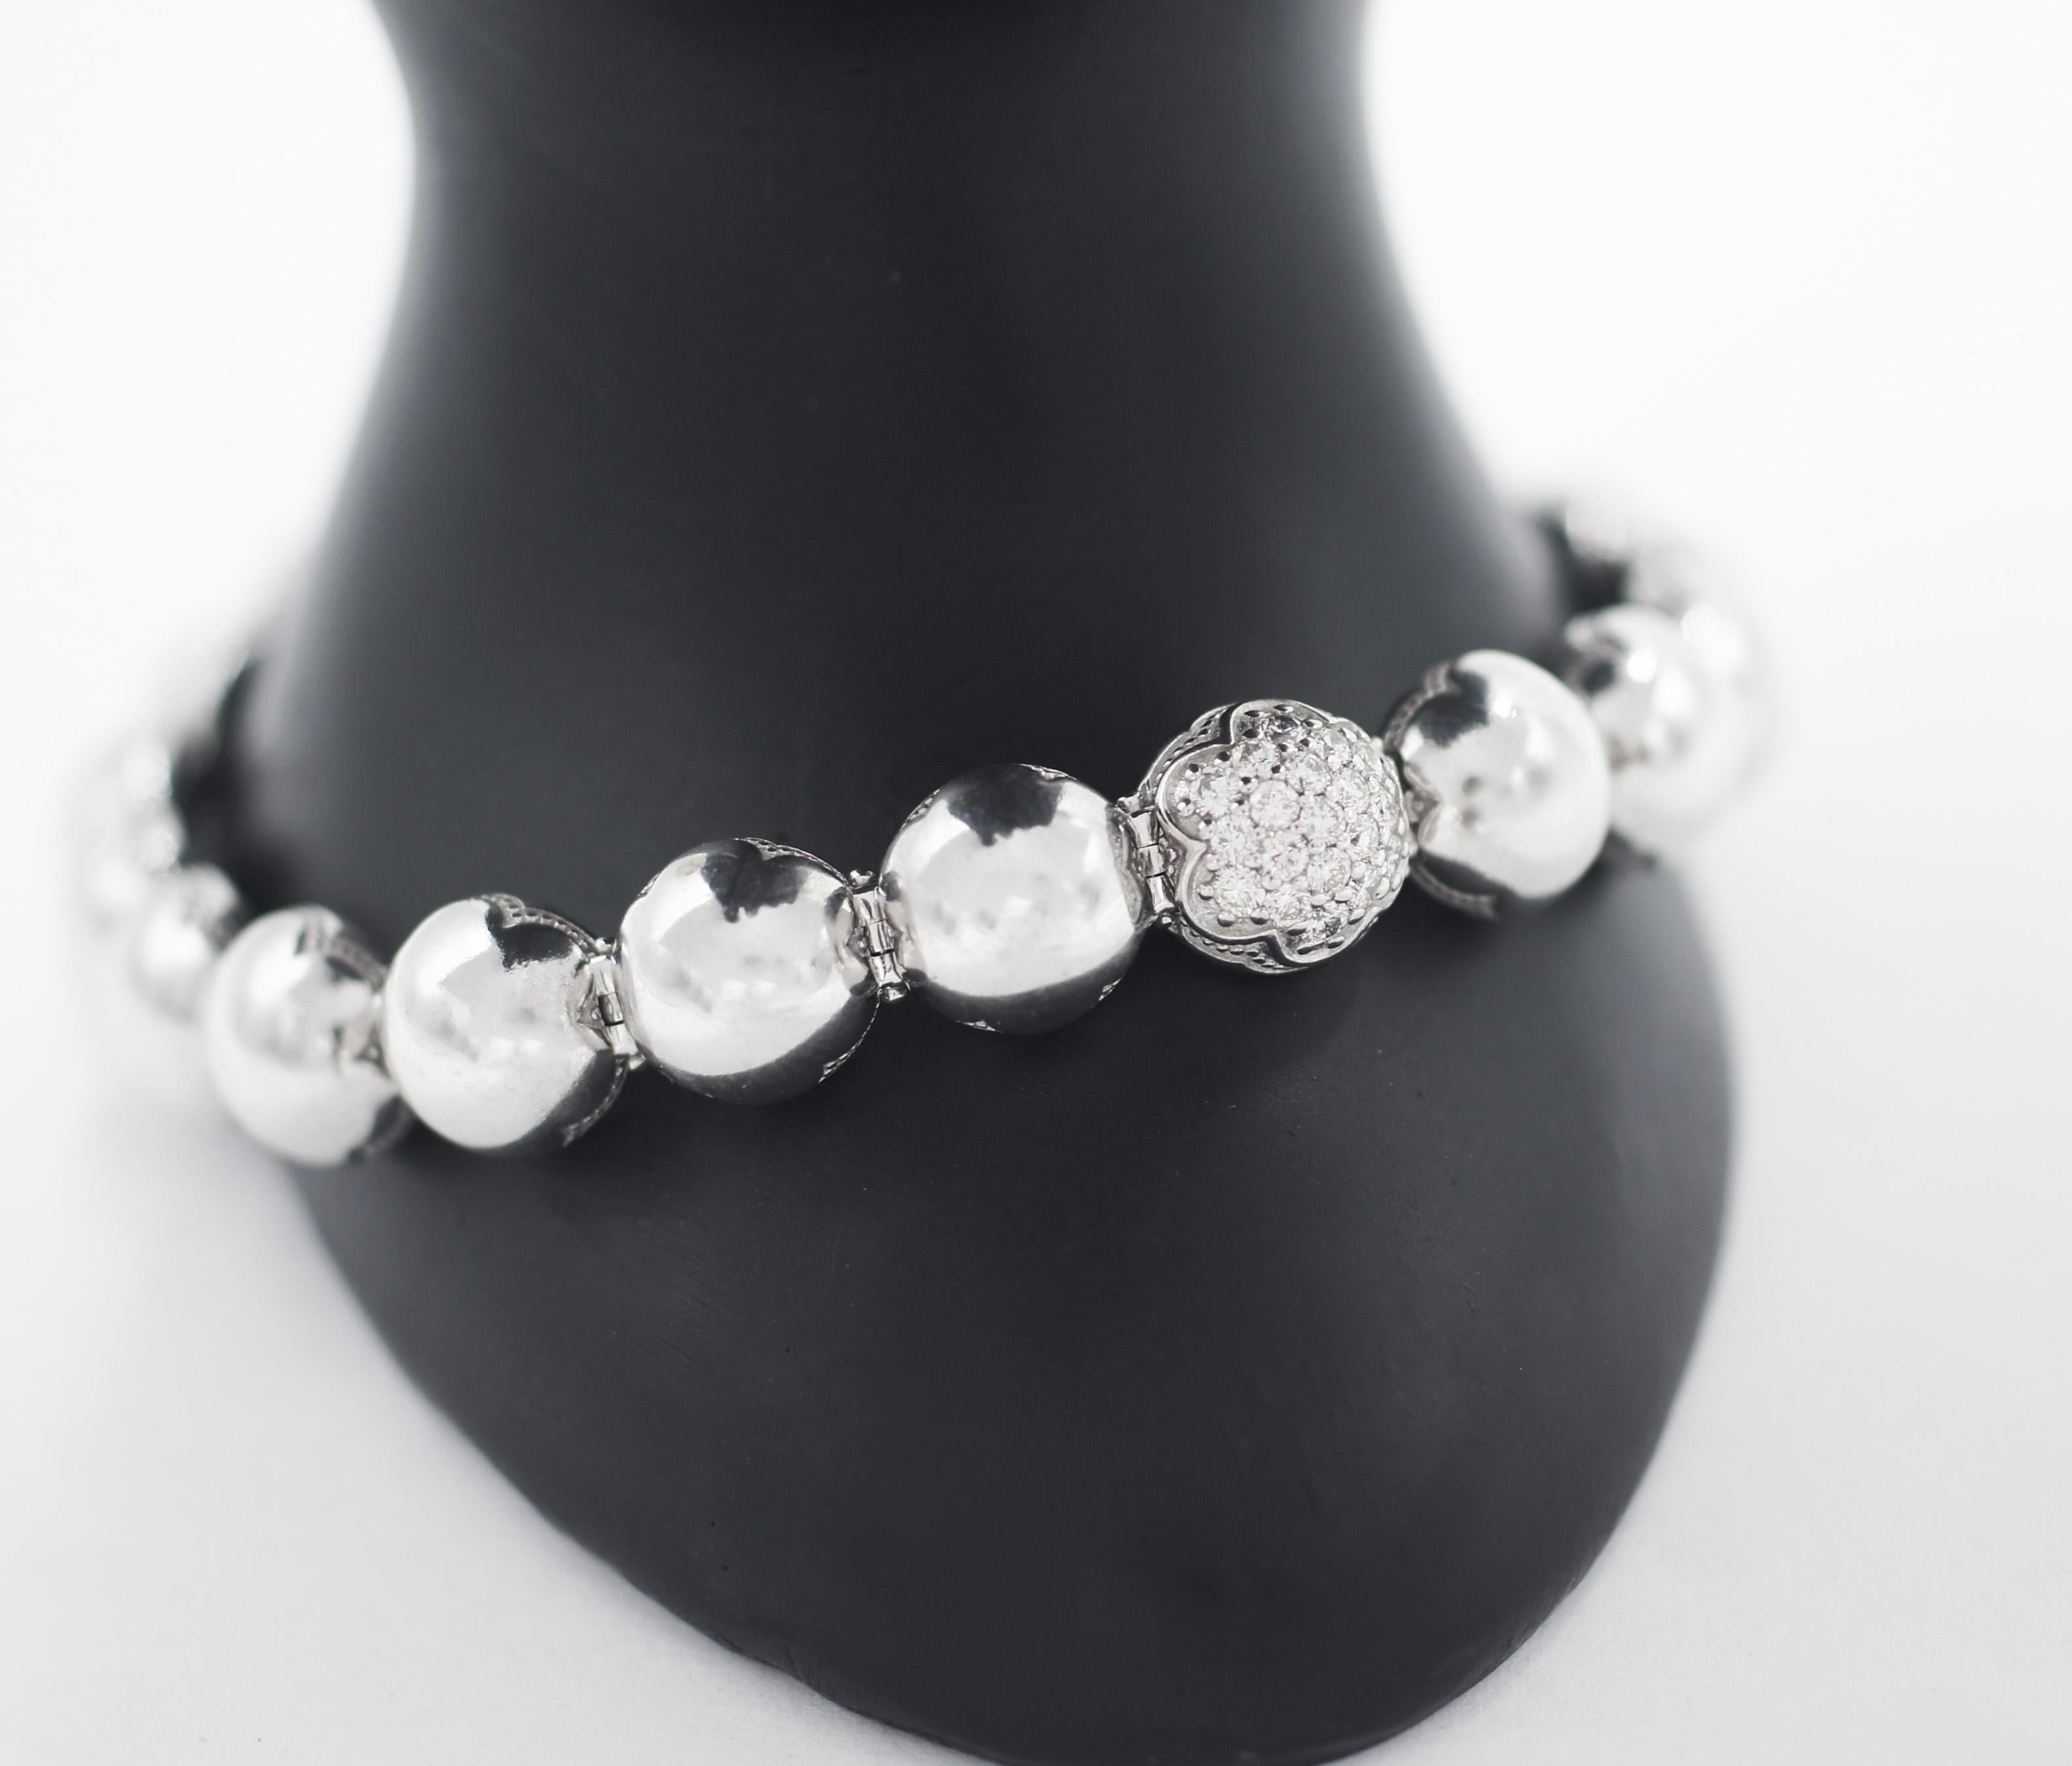 TACORI
Sonoma Mist
Silver Dew Drops Pavé Bracelet featuring Pavé
STYLE SB194
Reminiscent of dewdrops, engraved with wave-like detailing with Tacori milgrain on the edge of each. The easy-to-wear bracelet also features one stand-out dome with pavé